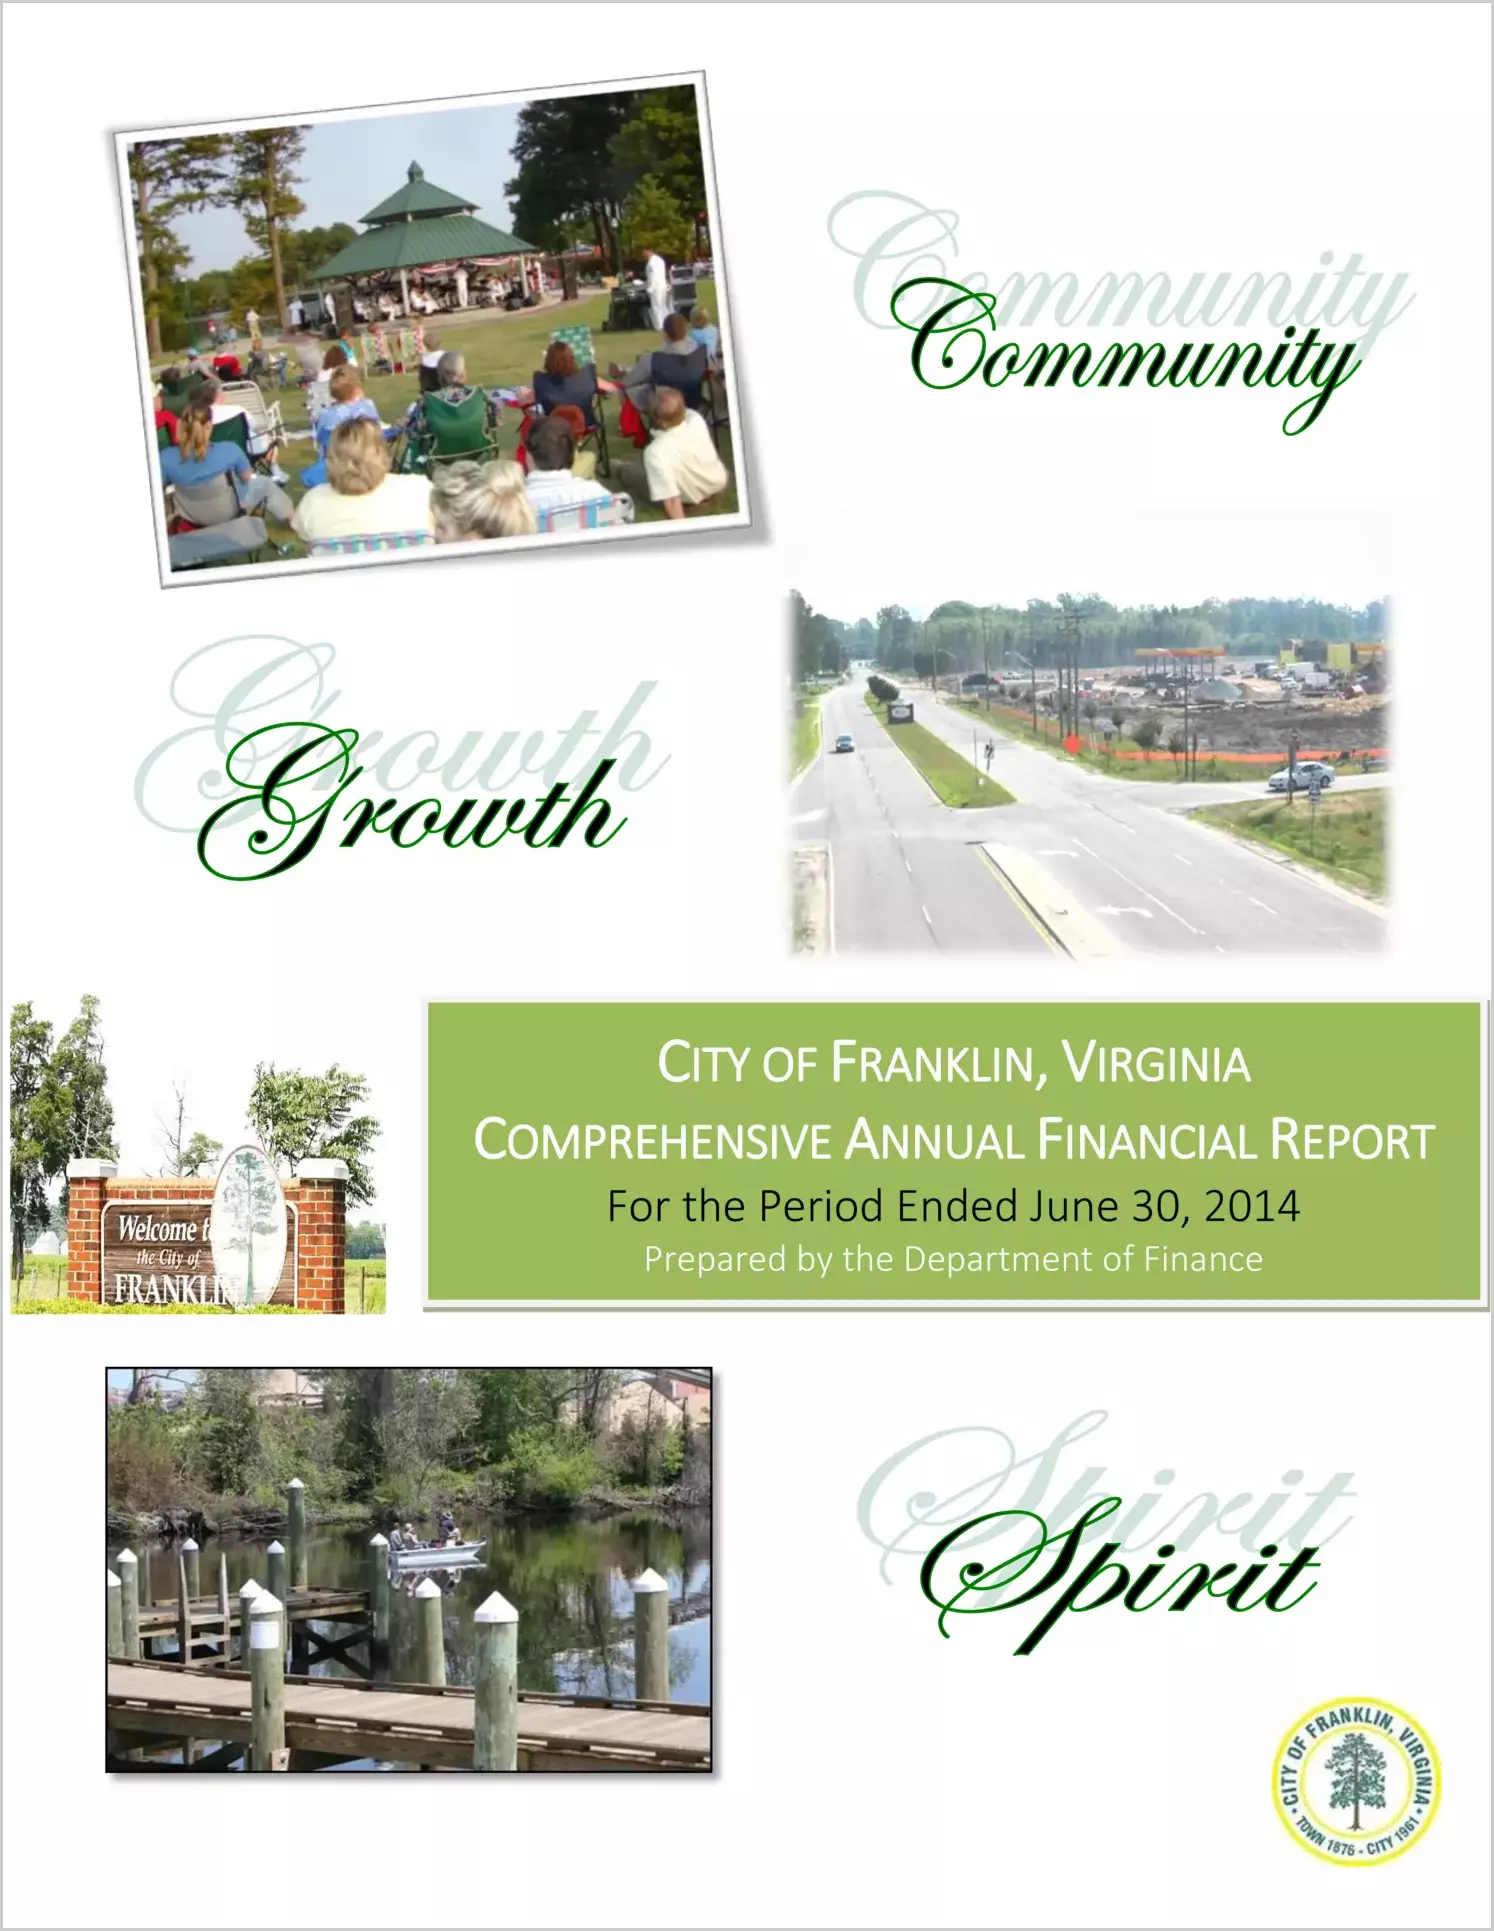 2014 Annual Financial Report for City of Franklin